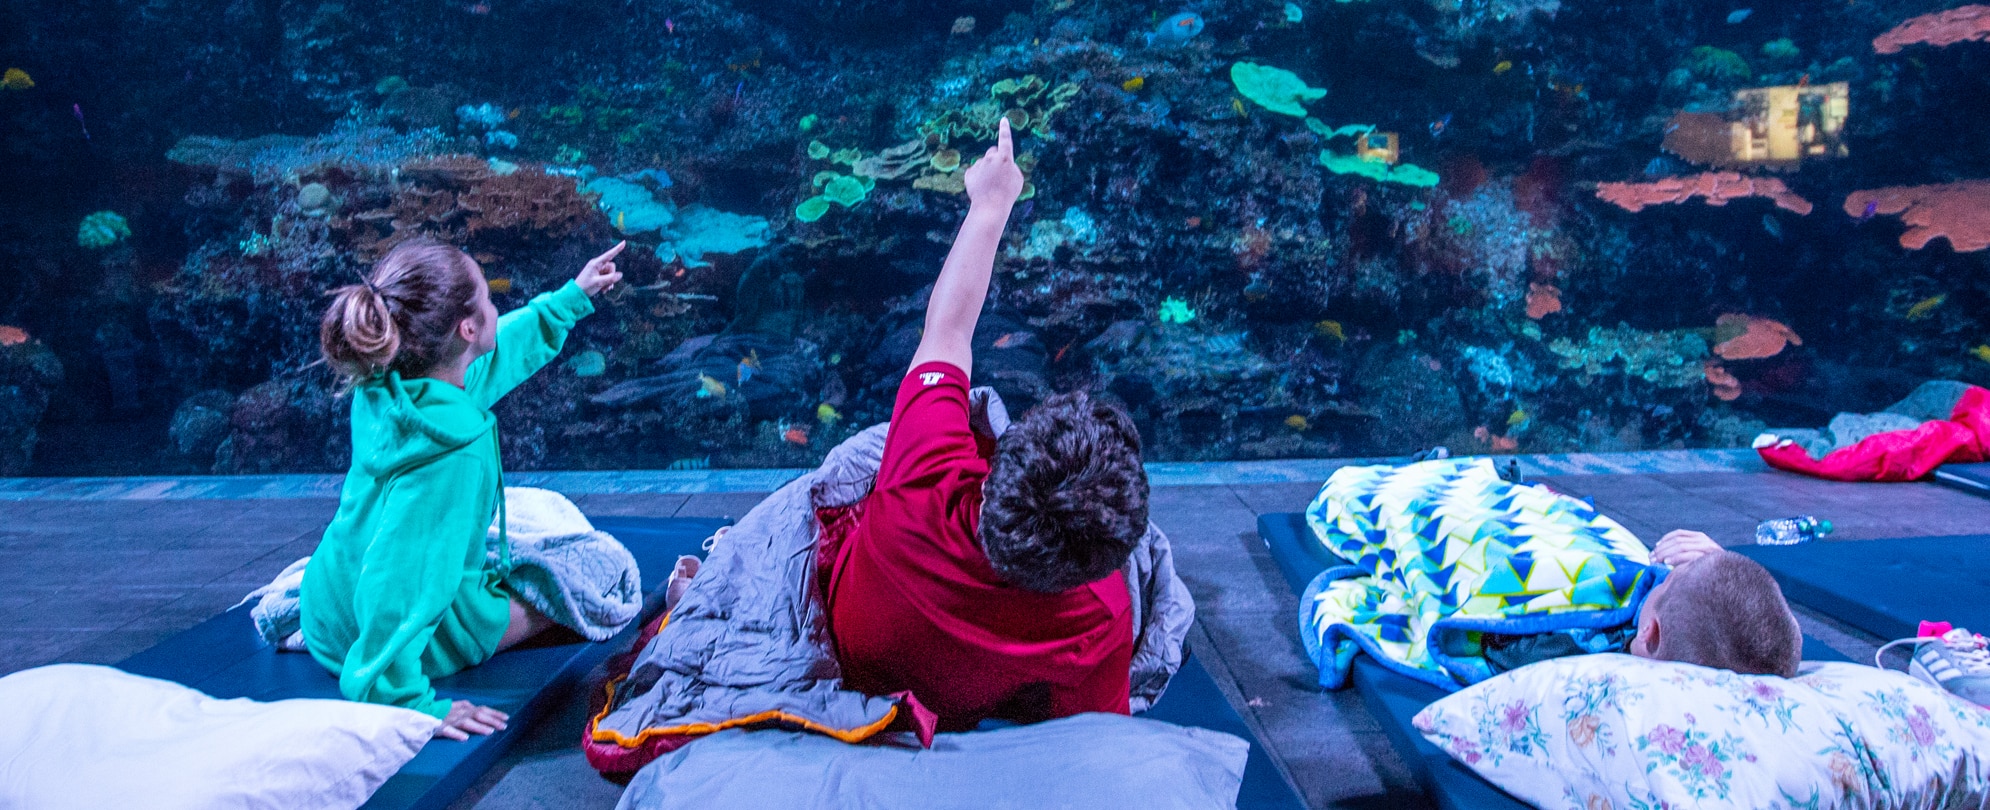 Two kids in sleeping bags point at a giant fish tank while a third child is lying next to them in a sleeping bag while attending Sleep Under the Sea at the Georgia Aquarium.